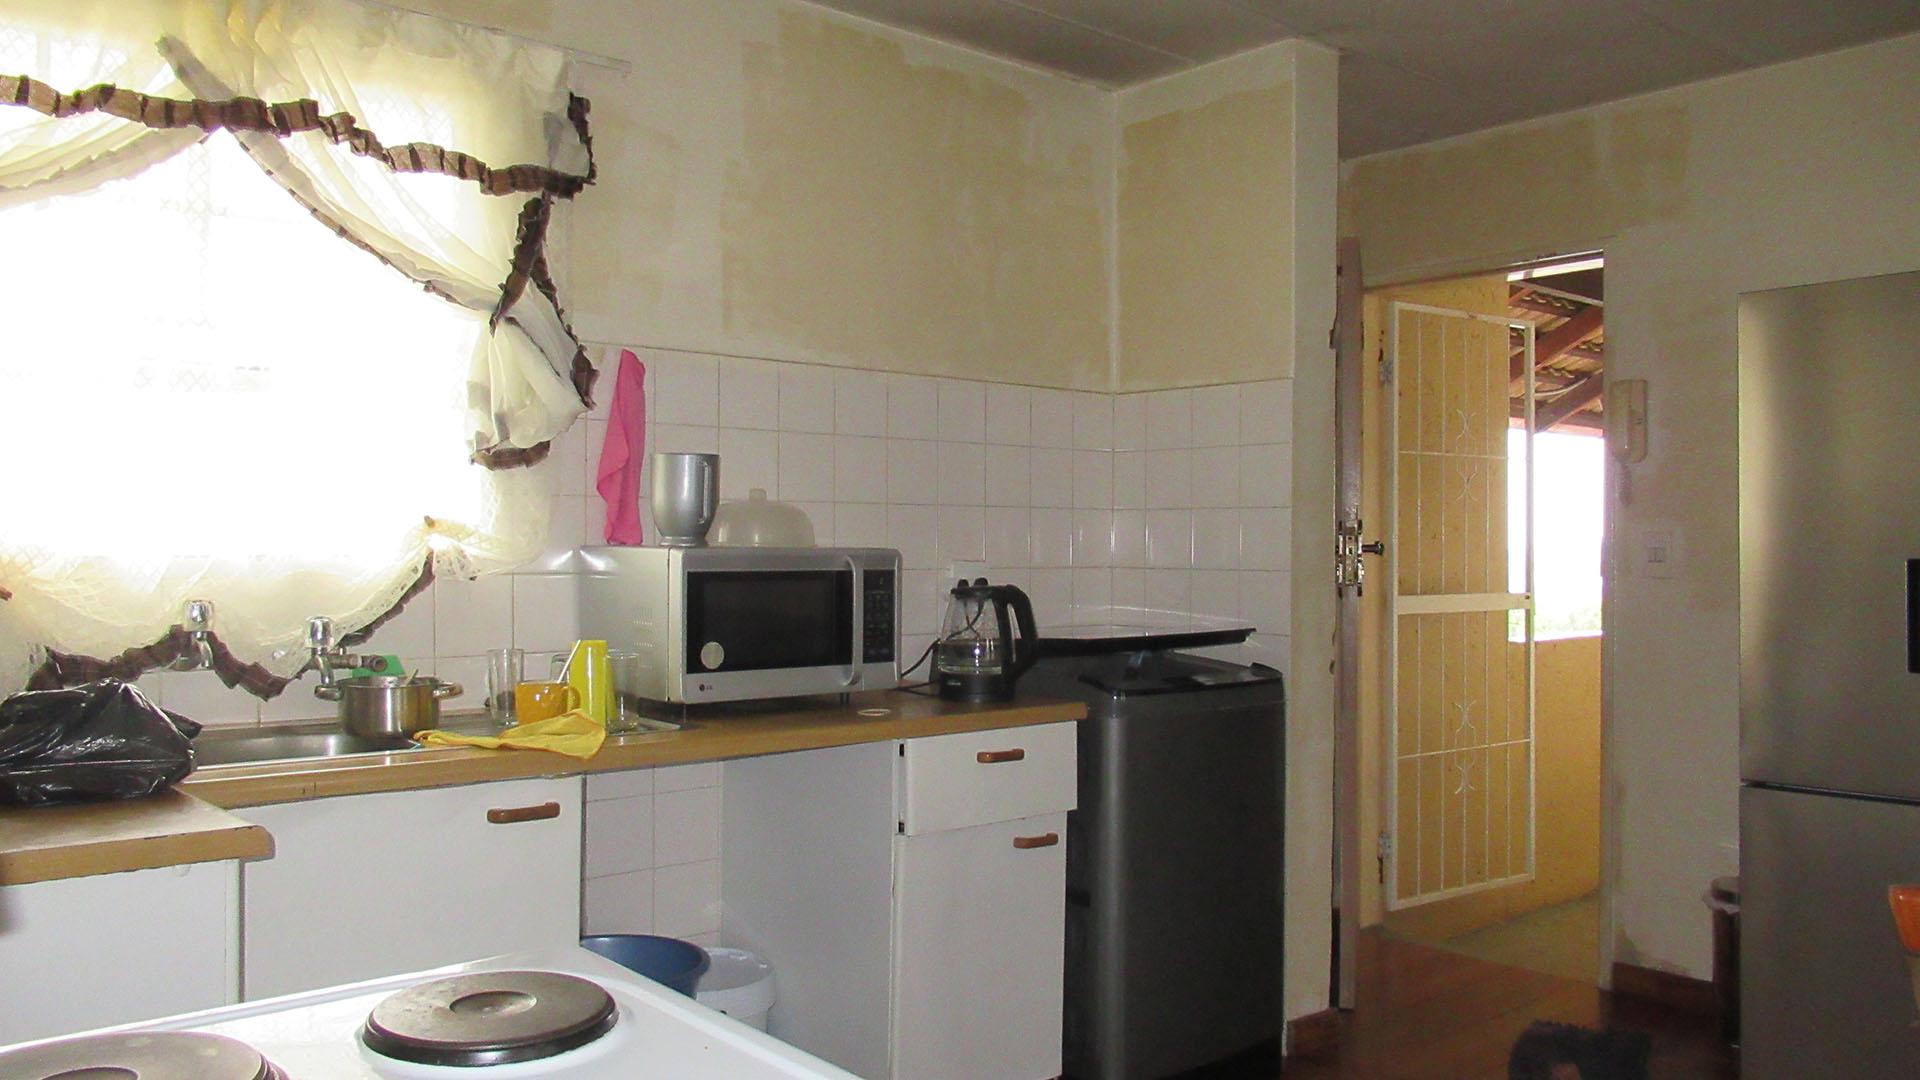 Kitchen - 6 square meters of property in Lindhaven